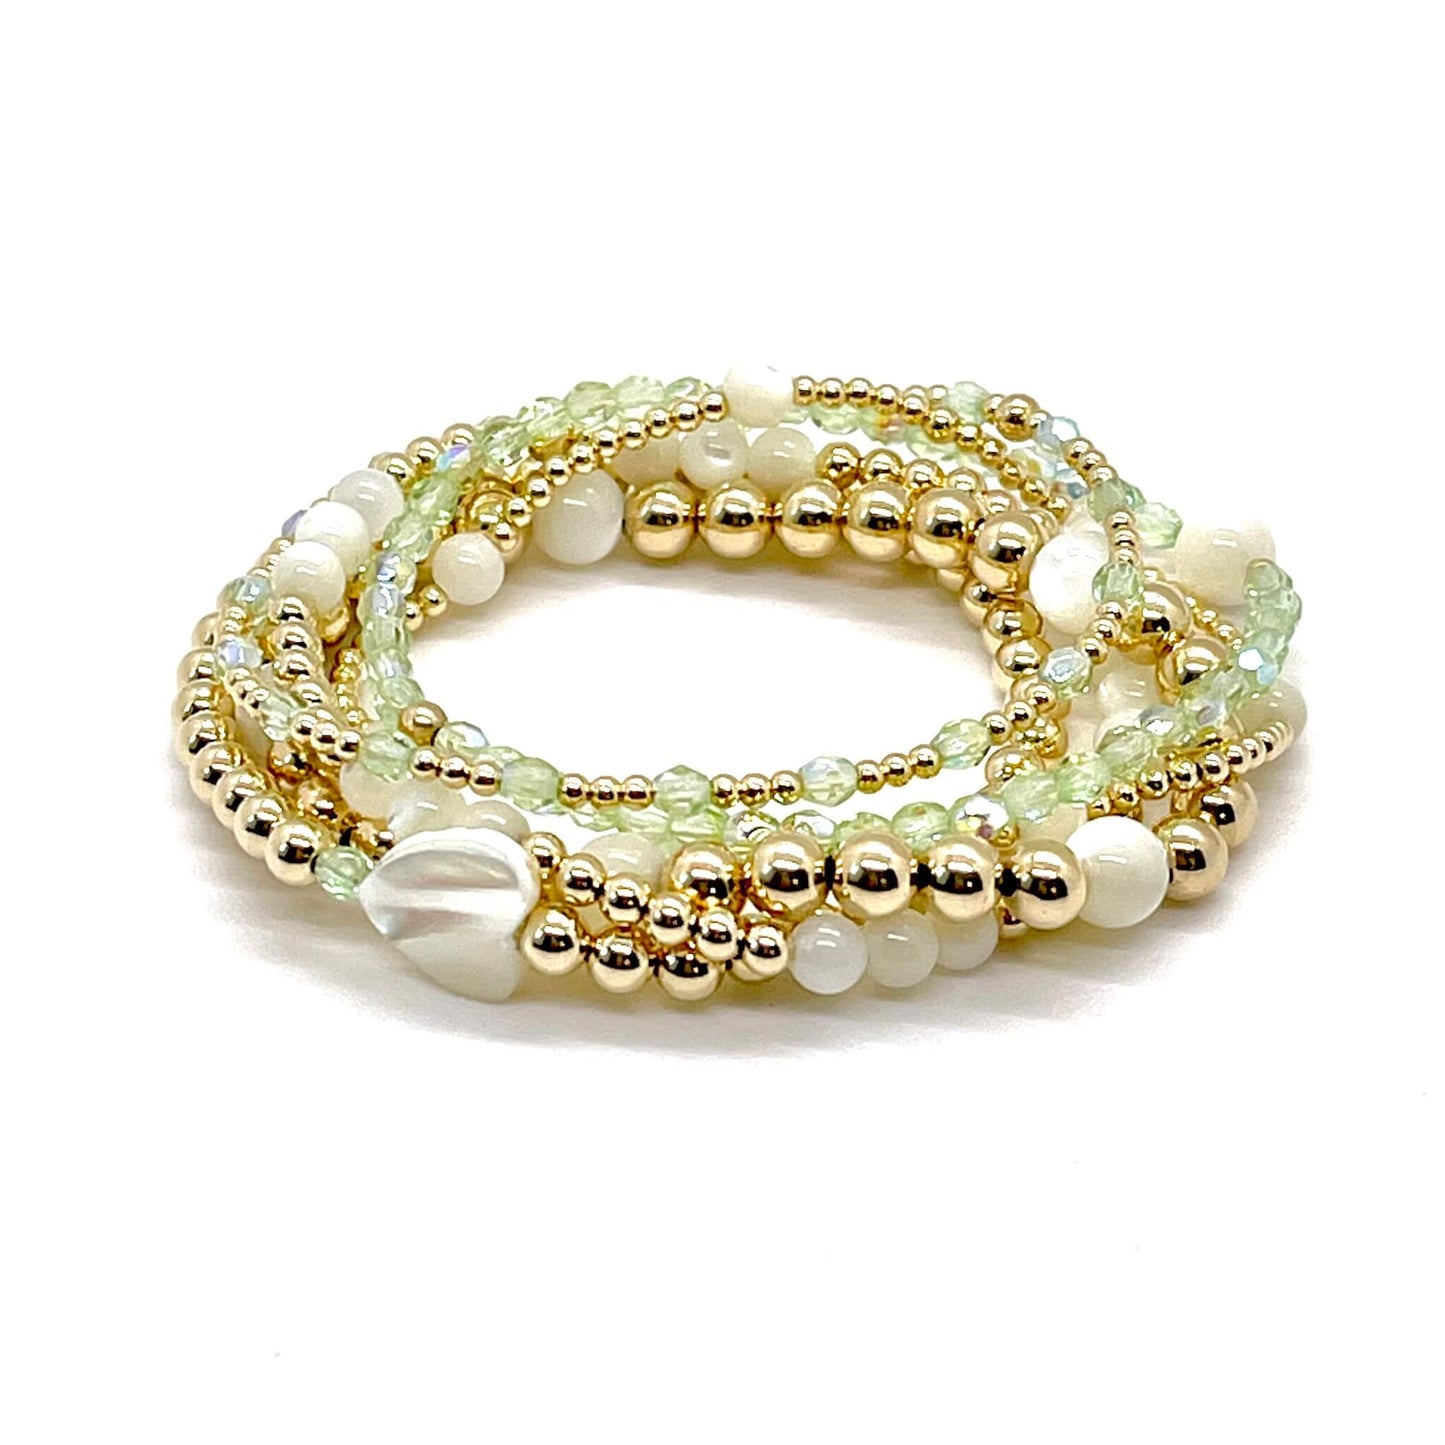 Gold, green, crystal, and pearl bracelet stack. Womens handmaded stretch bracelets.